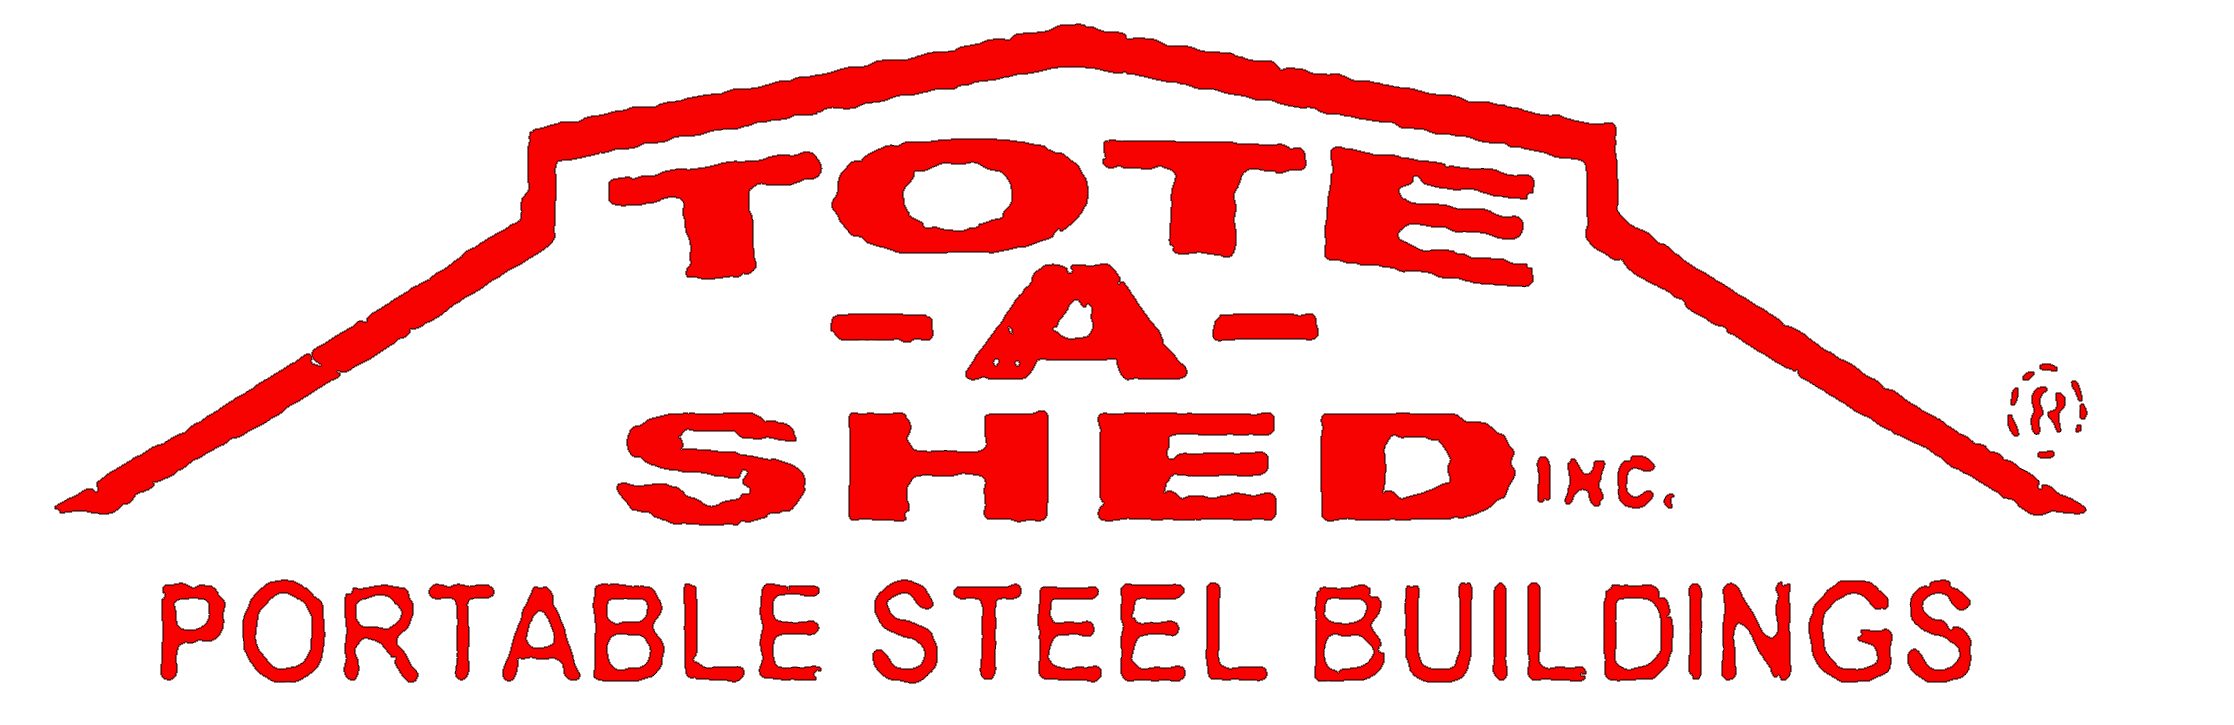 TOTE A SHED